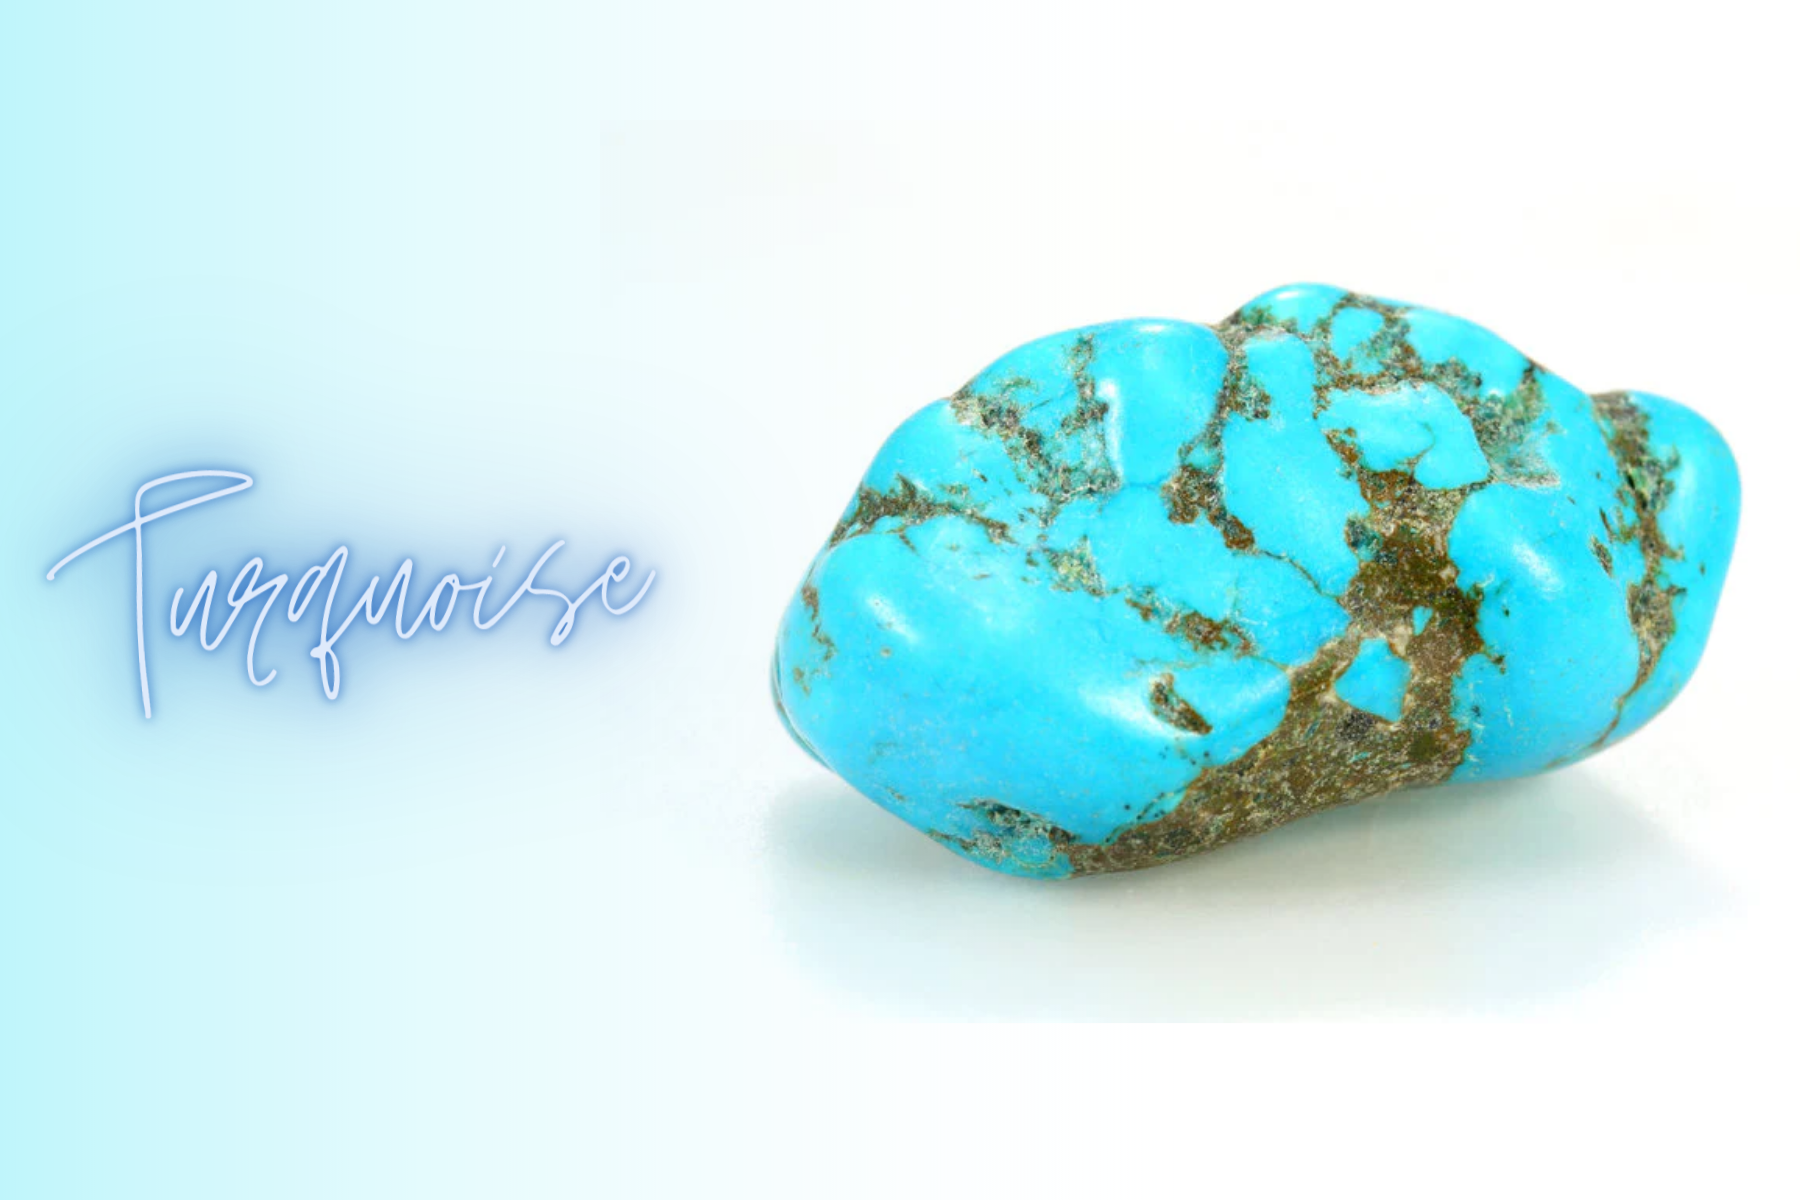 Rock-formed turquoise